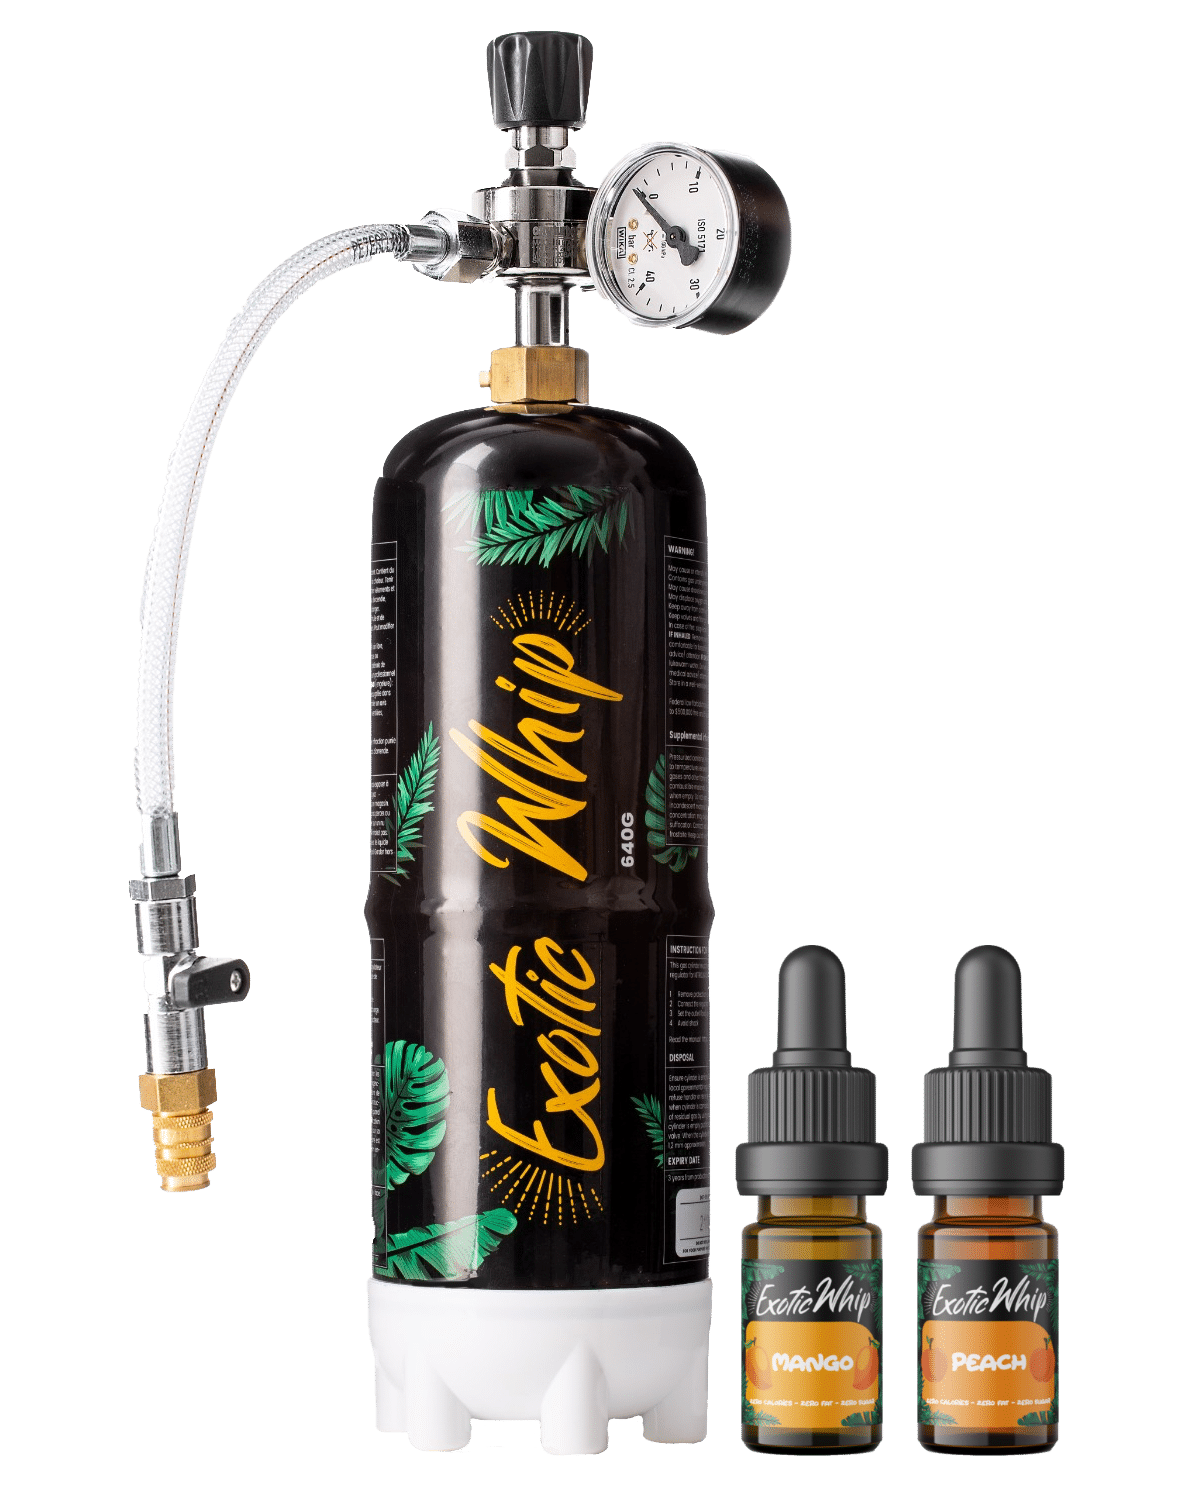 ExoticWhip Cream Chargers with regulator and flavor drops